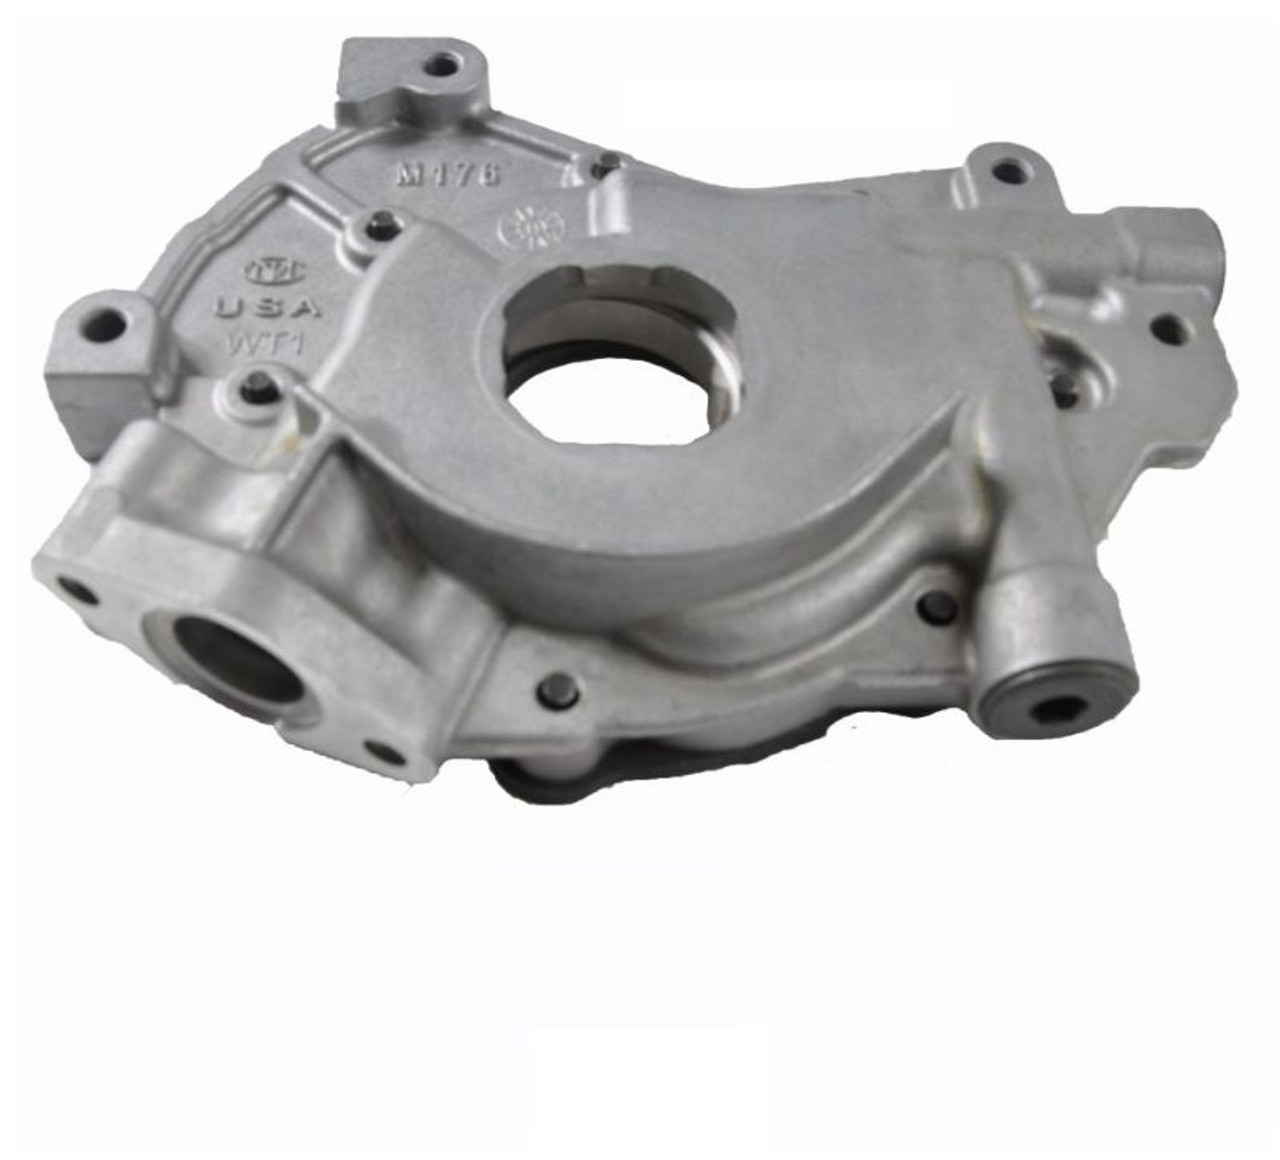 Oil Pump - 2001 Ford Expedition 5.4L (EP176.K146)